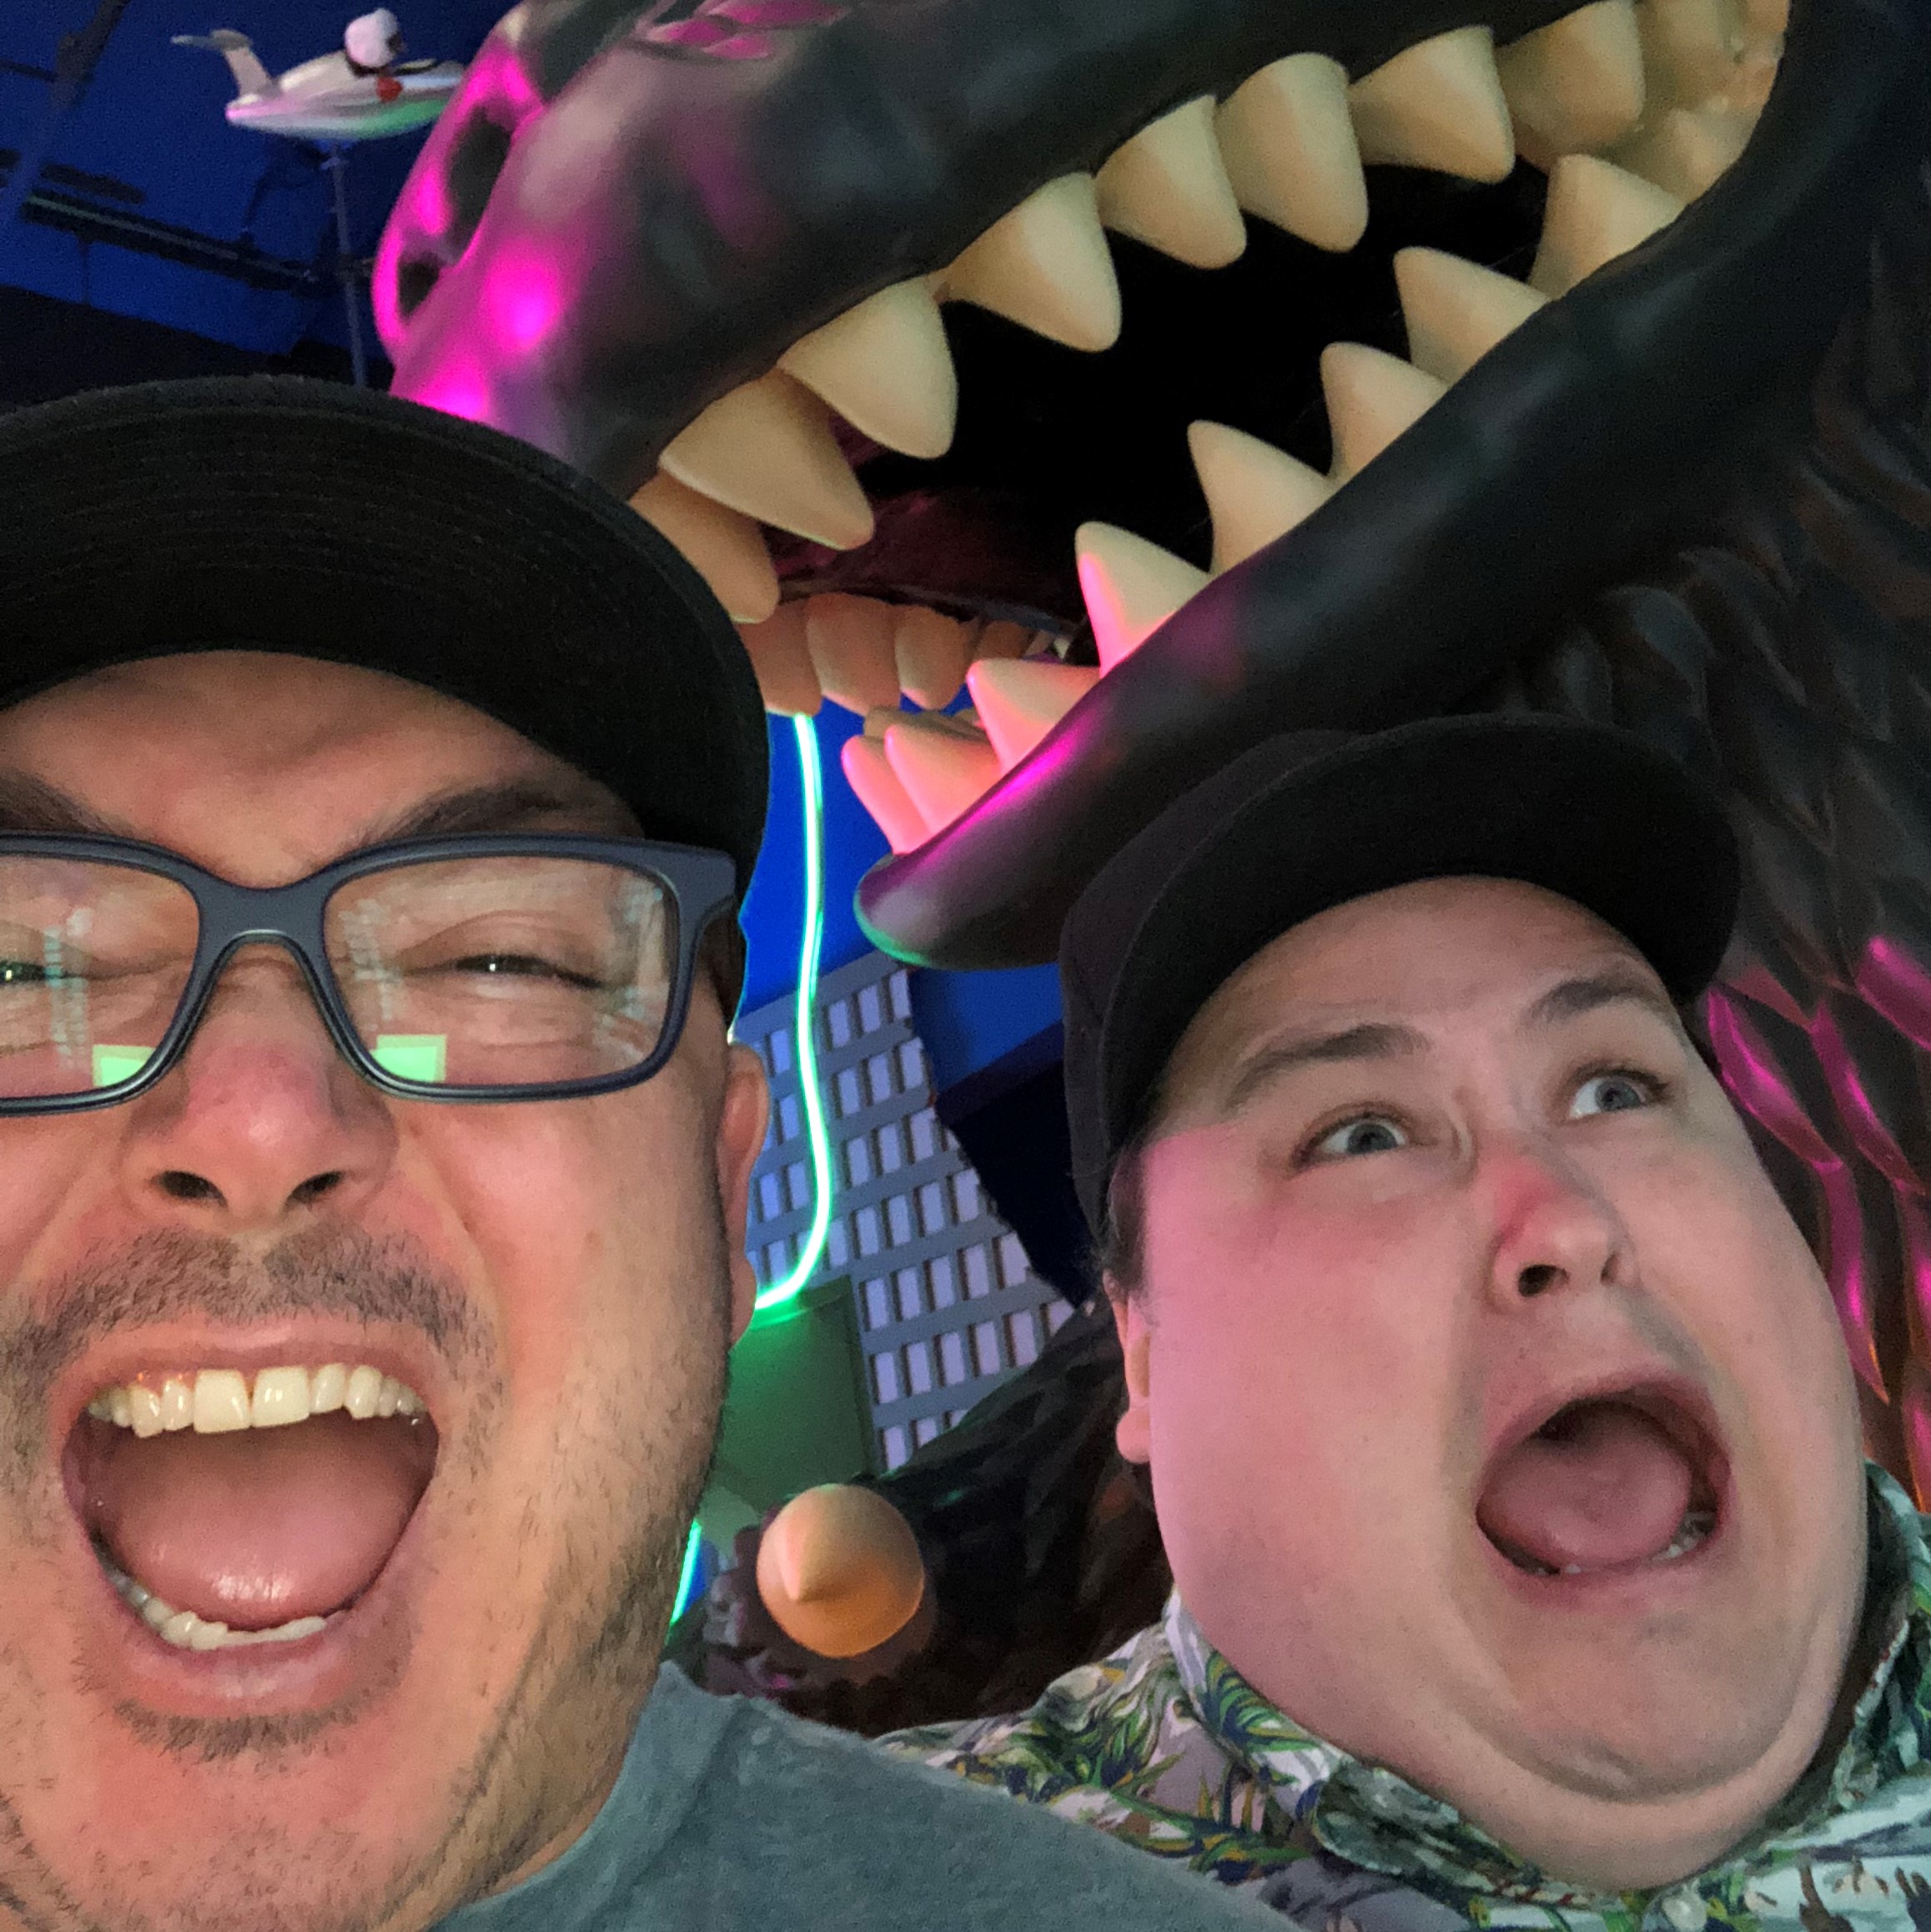 two terrified mens faces who apear to be fleaing from a Godzilla statue towering above them